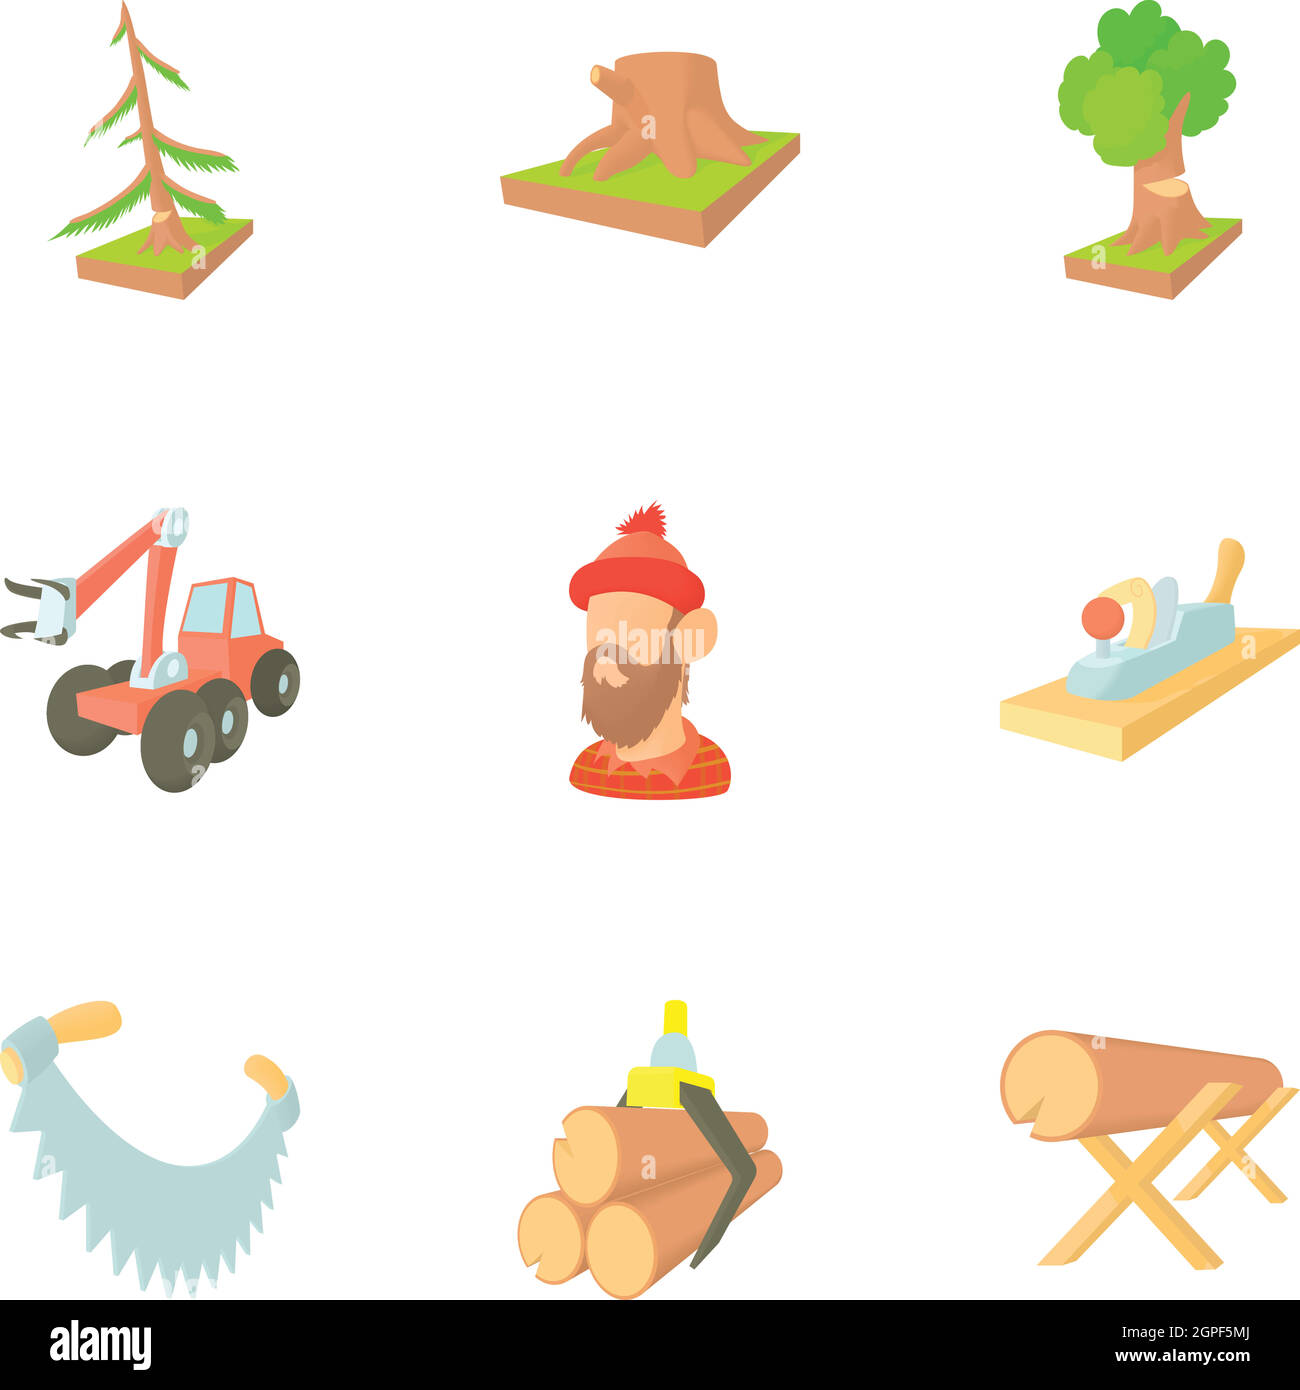 Woodcutter icons set, cartoon style Stock Vector